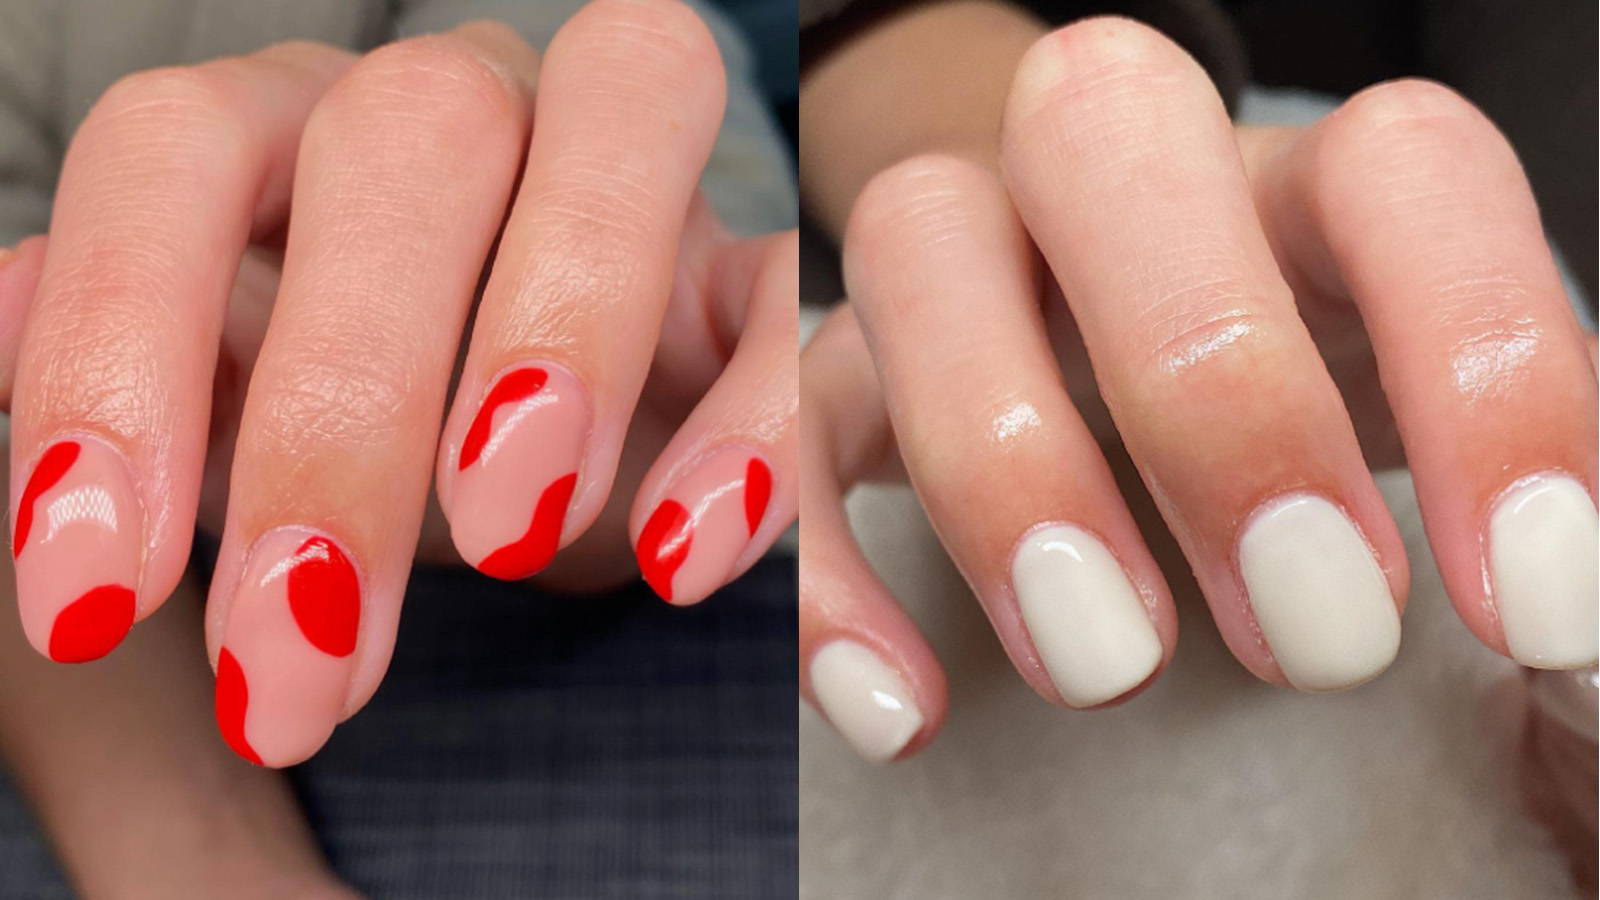 Ask Grace: My Nails Break Easily, What Can I Do? - Beauty Bay Edited